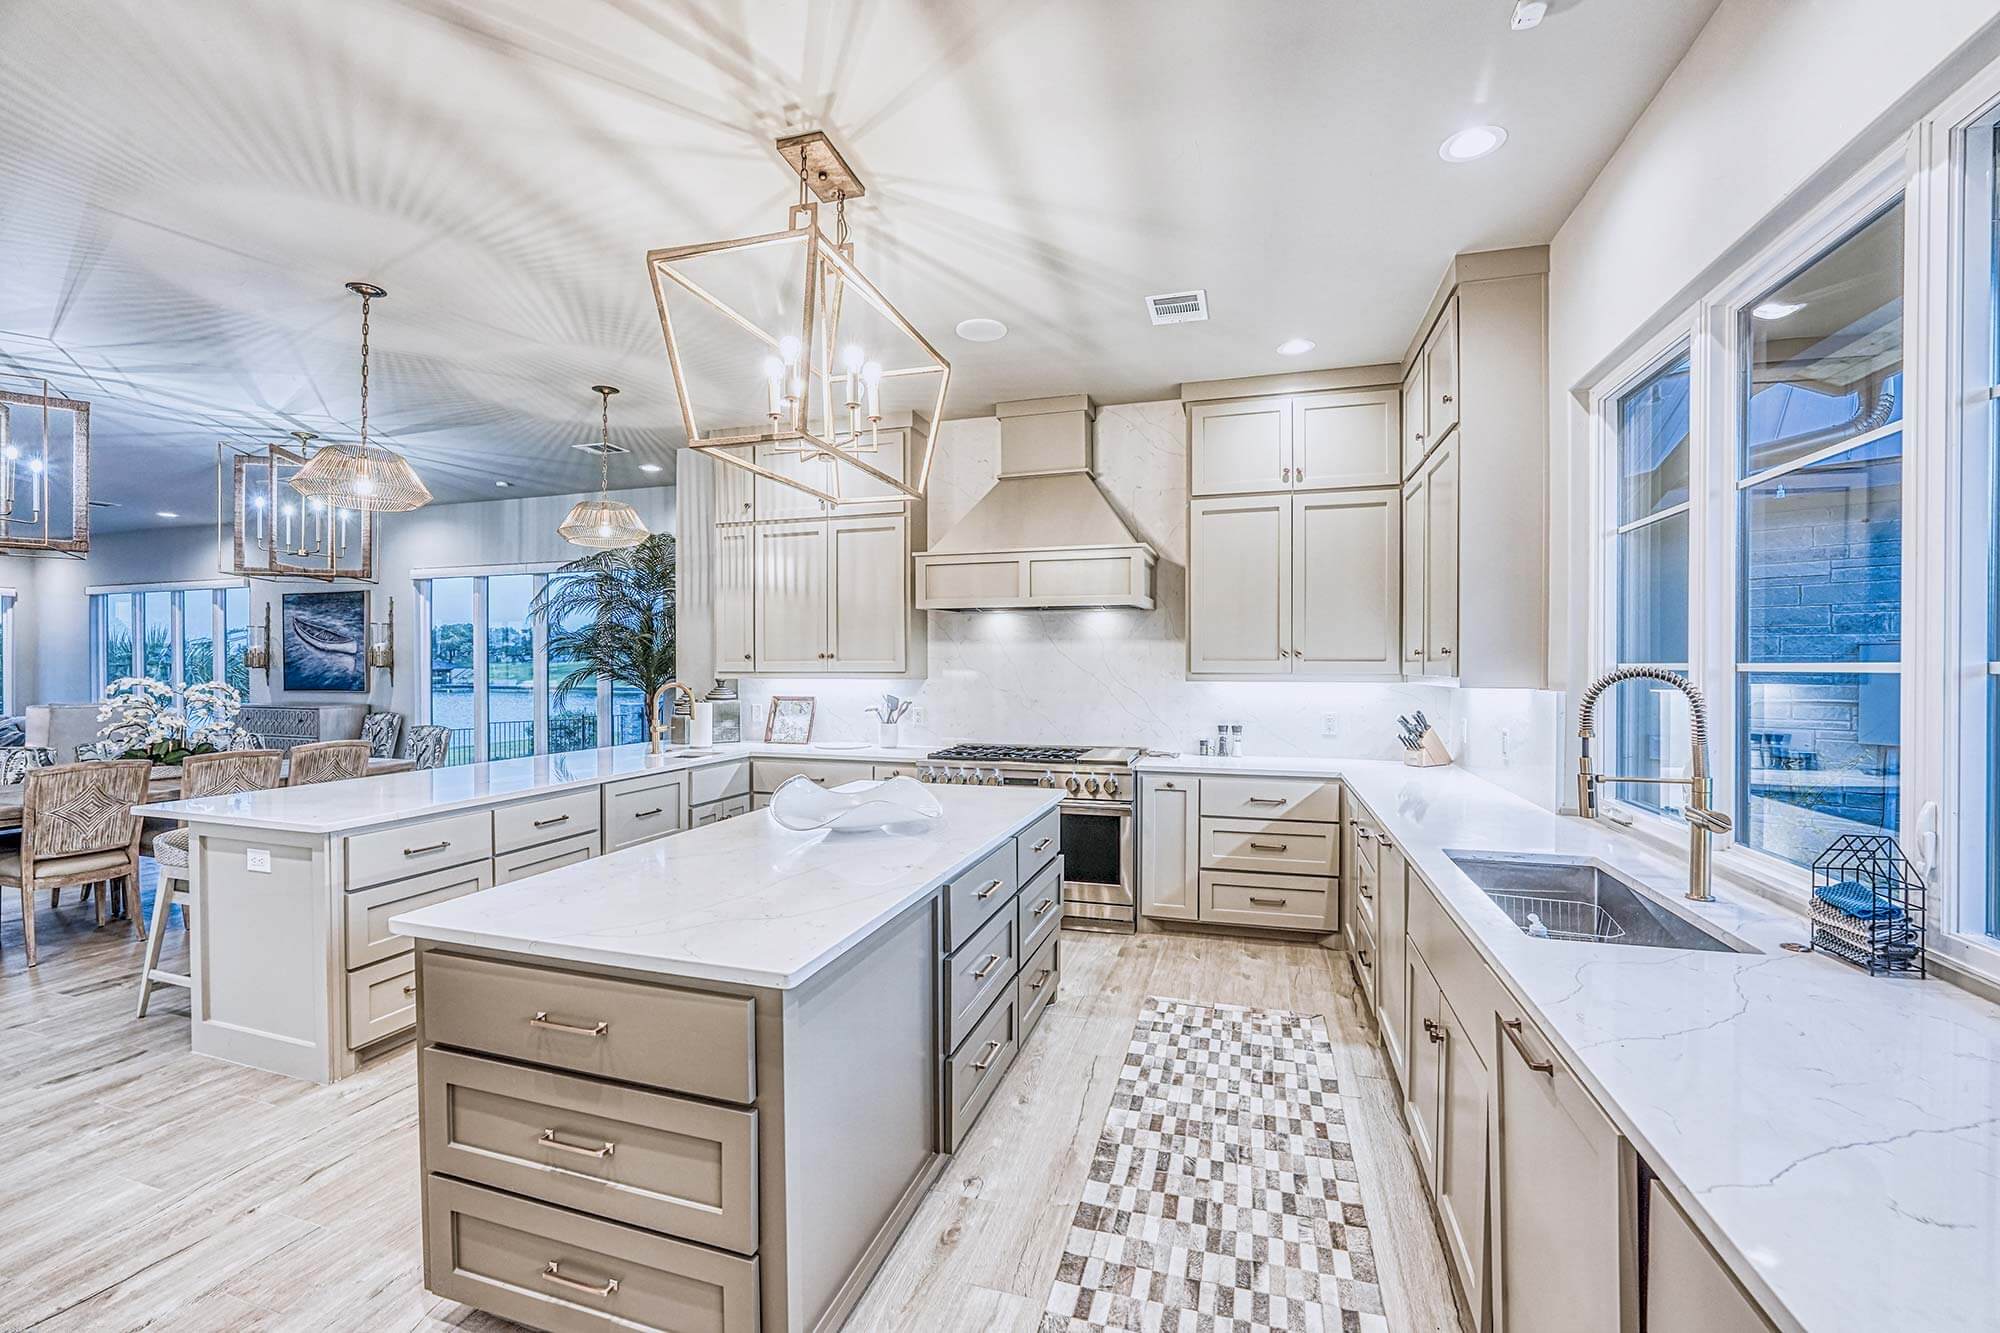 Zbranek and Holt Custom Homes Soft Modern Transitional Gourmet Kitchen and Dining Area Overlooking Appleadh